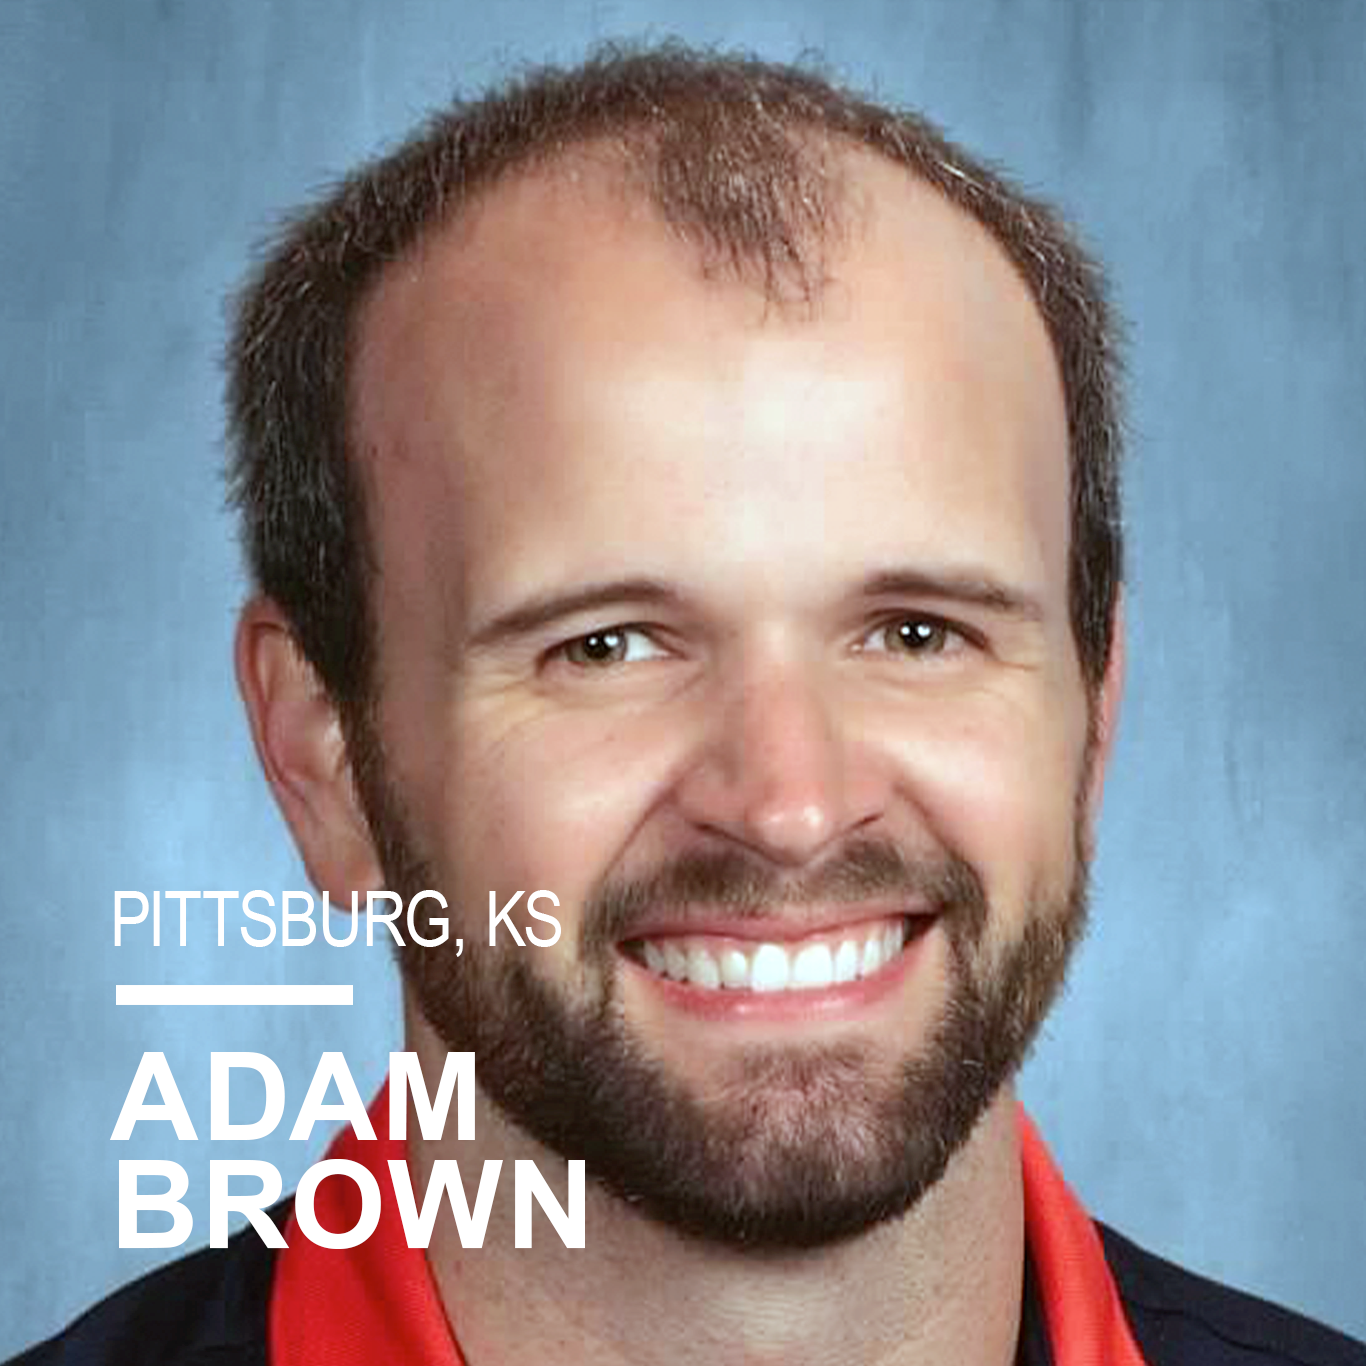 Adam Brown teaches kindergarten at Lakeside Elementary in Pittsburg, KS. He also assists with service learning programs after school. Adam is passionate about providing hands-on learning for his students and building relationships with them. He’s a past USD 250 Rising Star Award winner and a Crawford County Educator of the Year nominee. Adam is a big advocate for project-based learning (PBL) and hopes to use his previous PBL experience to bring PBL and STEM opportunities to his kindergarten students.